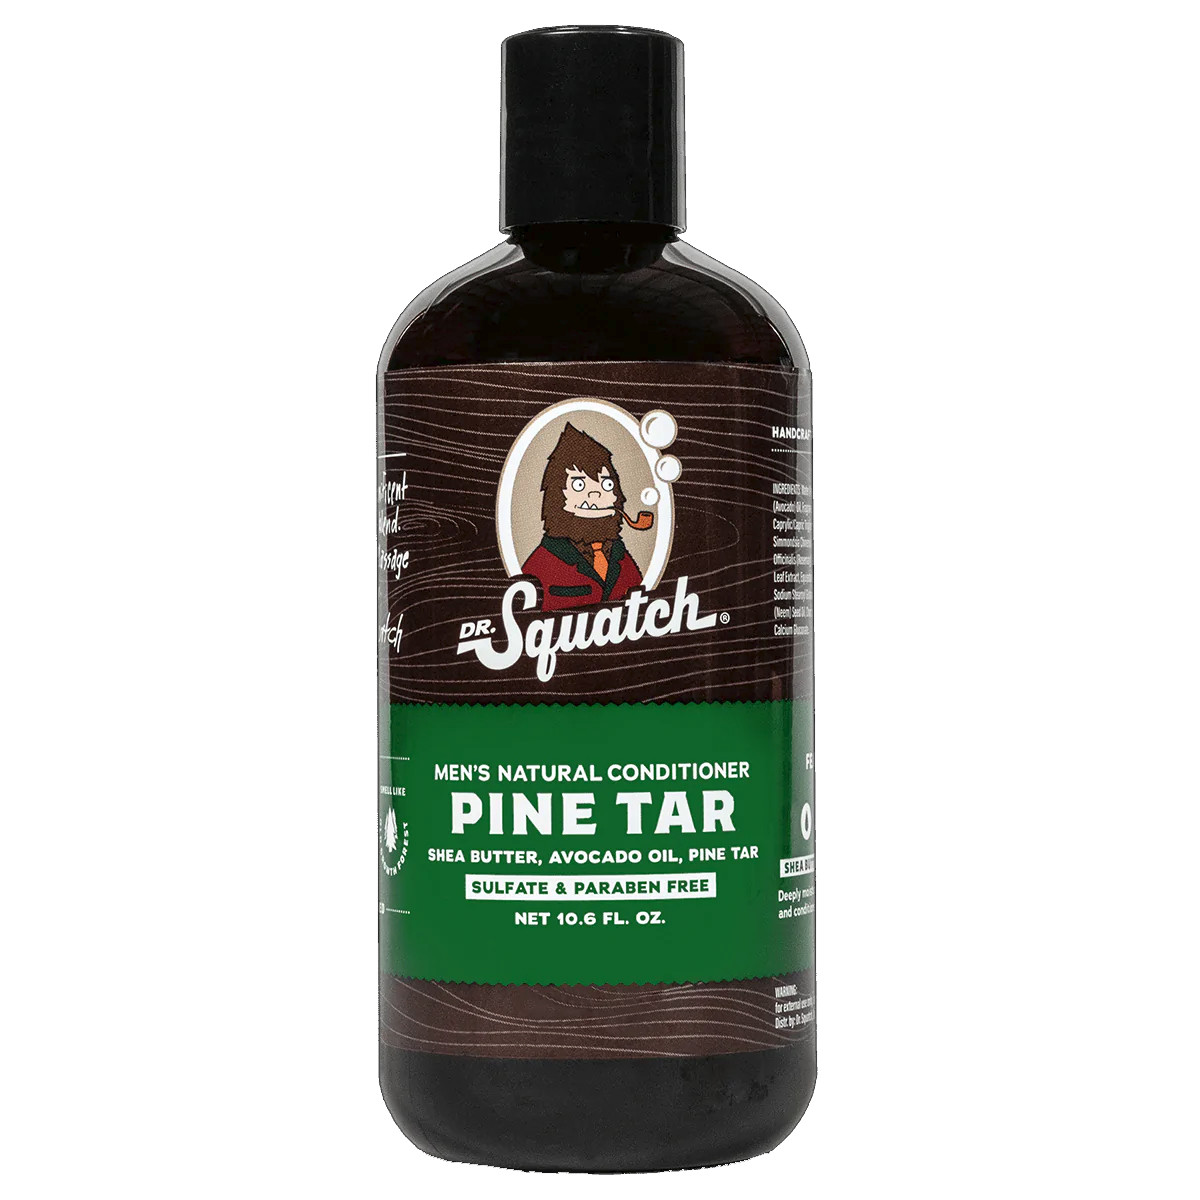 https://cdn11.bigcommerce.com/s-nkdwo8ulw8/products/11343/images/15659/131107_Conditioner-Pine-Tar__93772.1667847001.1280.1280.jpg?c=2